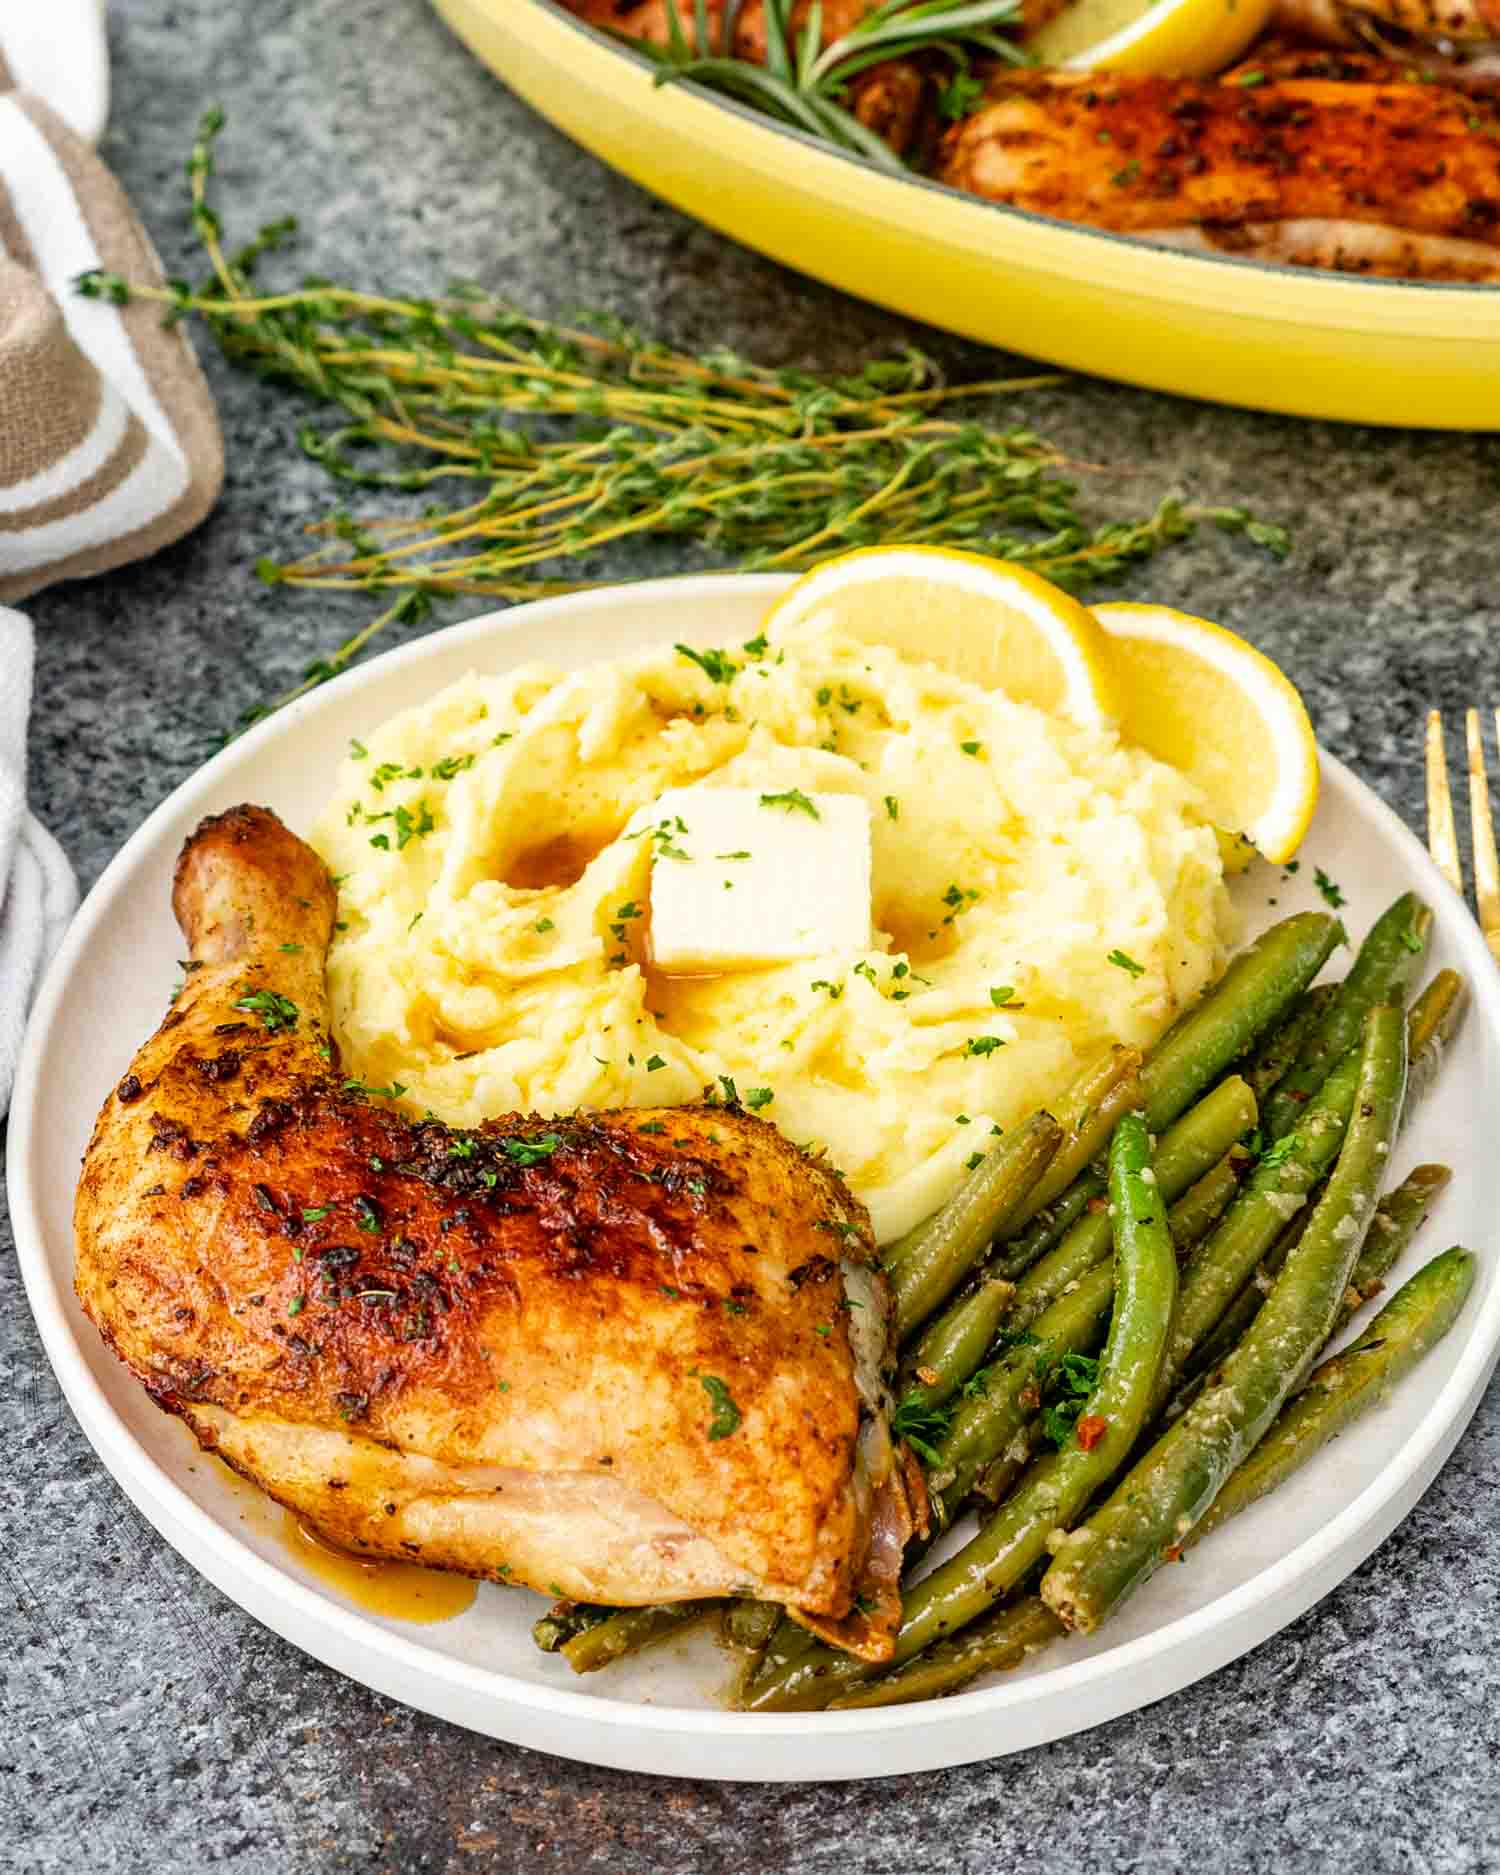 a baked chicken leg on a white plate with a side of mashed potatoes and green beans.